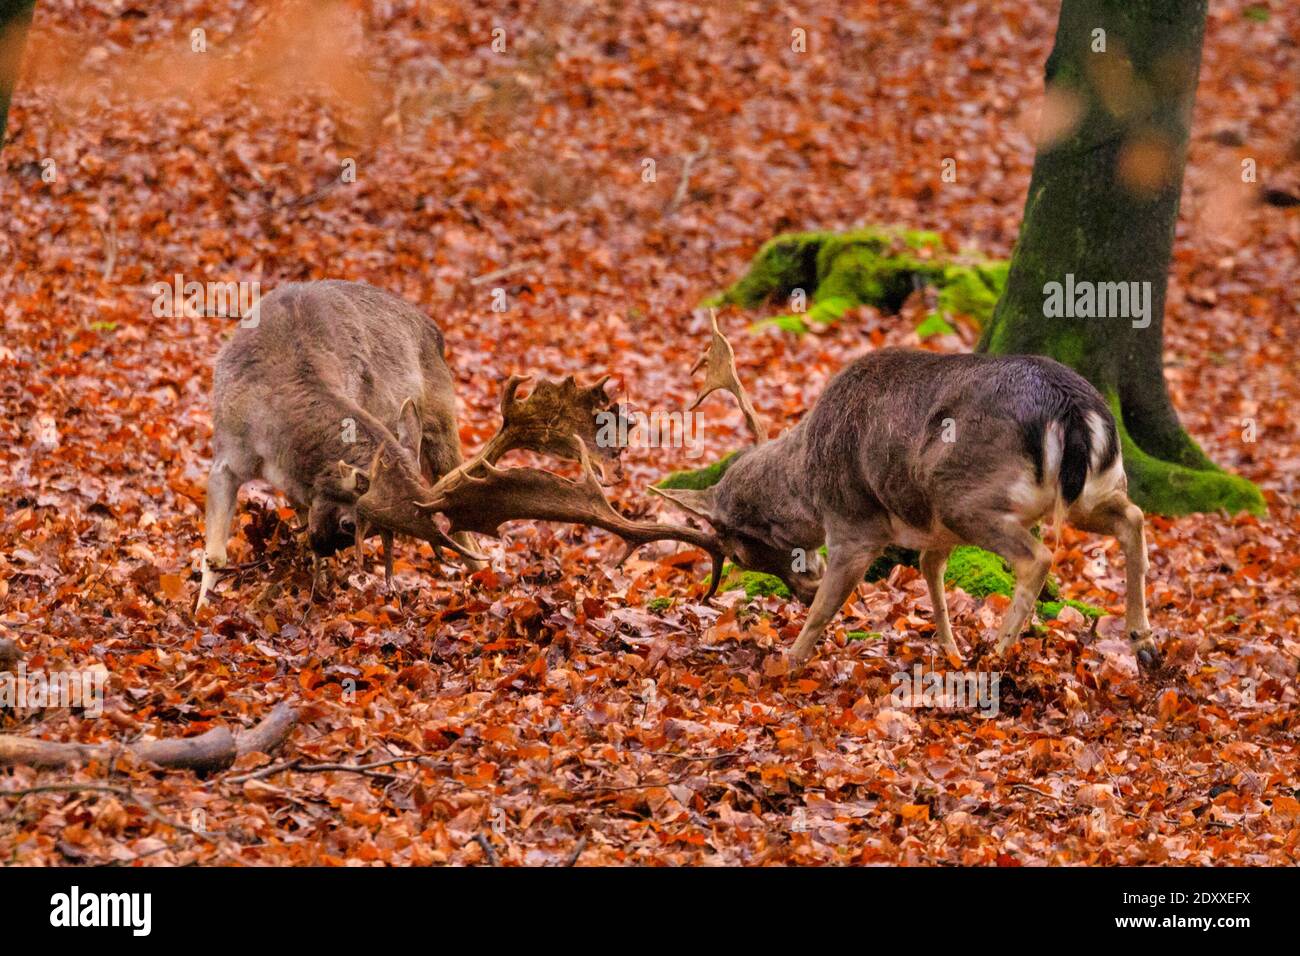 Duelmen, NRW, Germany. 24th Dec, 2020. Christmas fight - two young bucks test out their strength by locking antlers. Fallow deer bucks (dama dama) in woodland bring some festive spirit to the Muensterland countryside on a dry but cold Christmas eve. Credit: Imageplotter/Alamy Live News Stock Photo